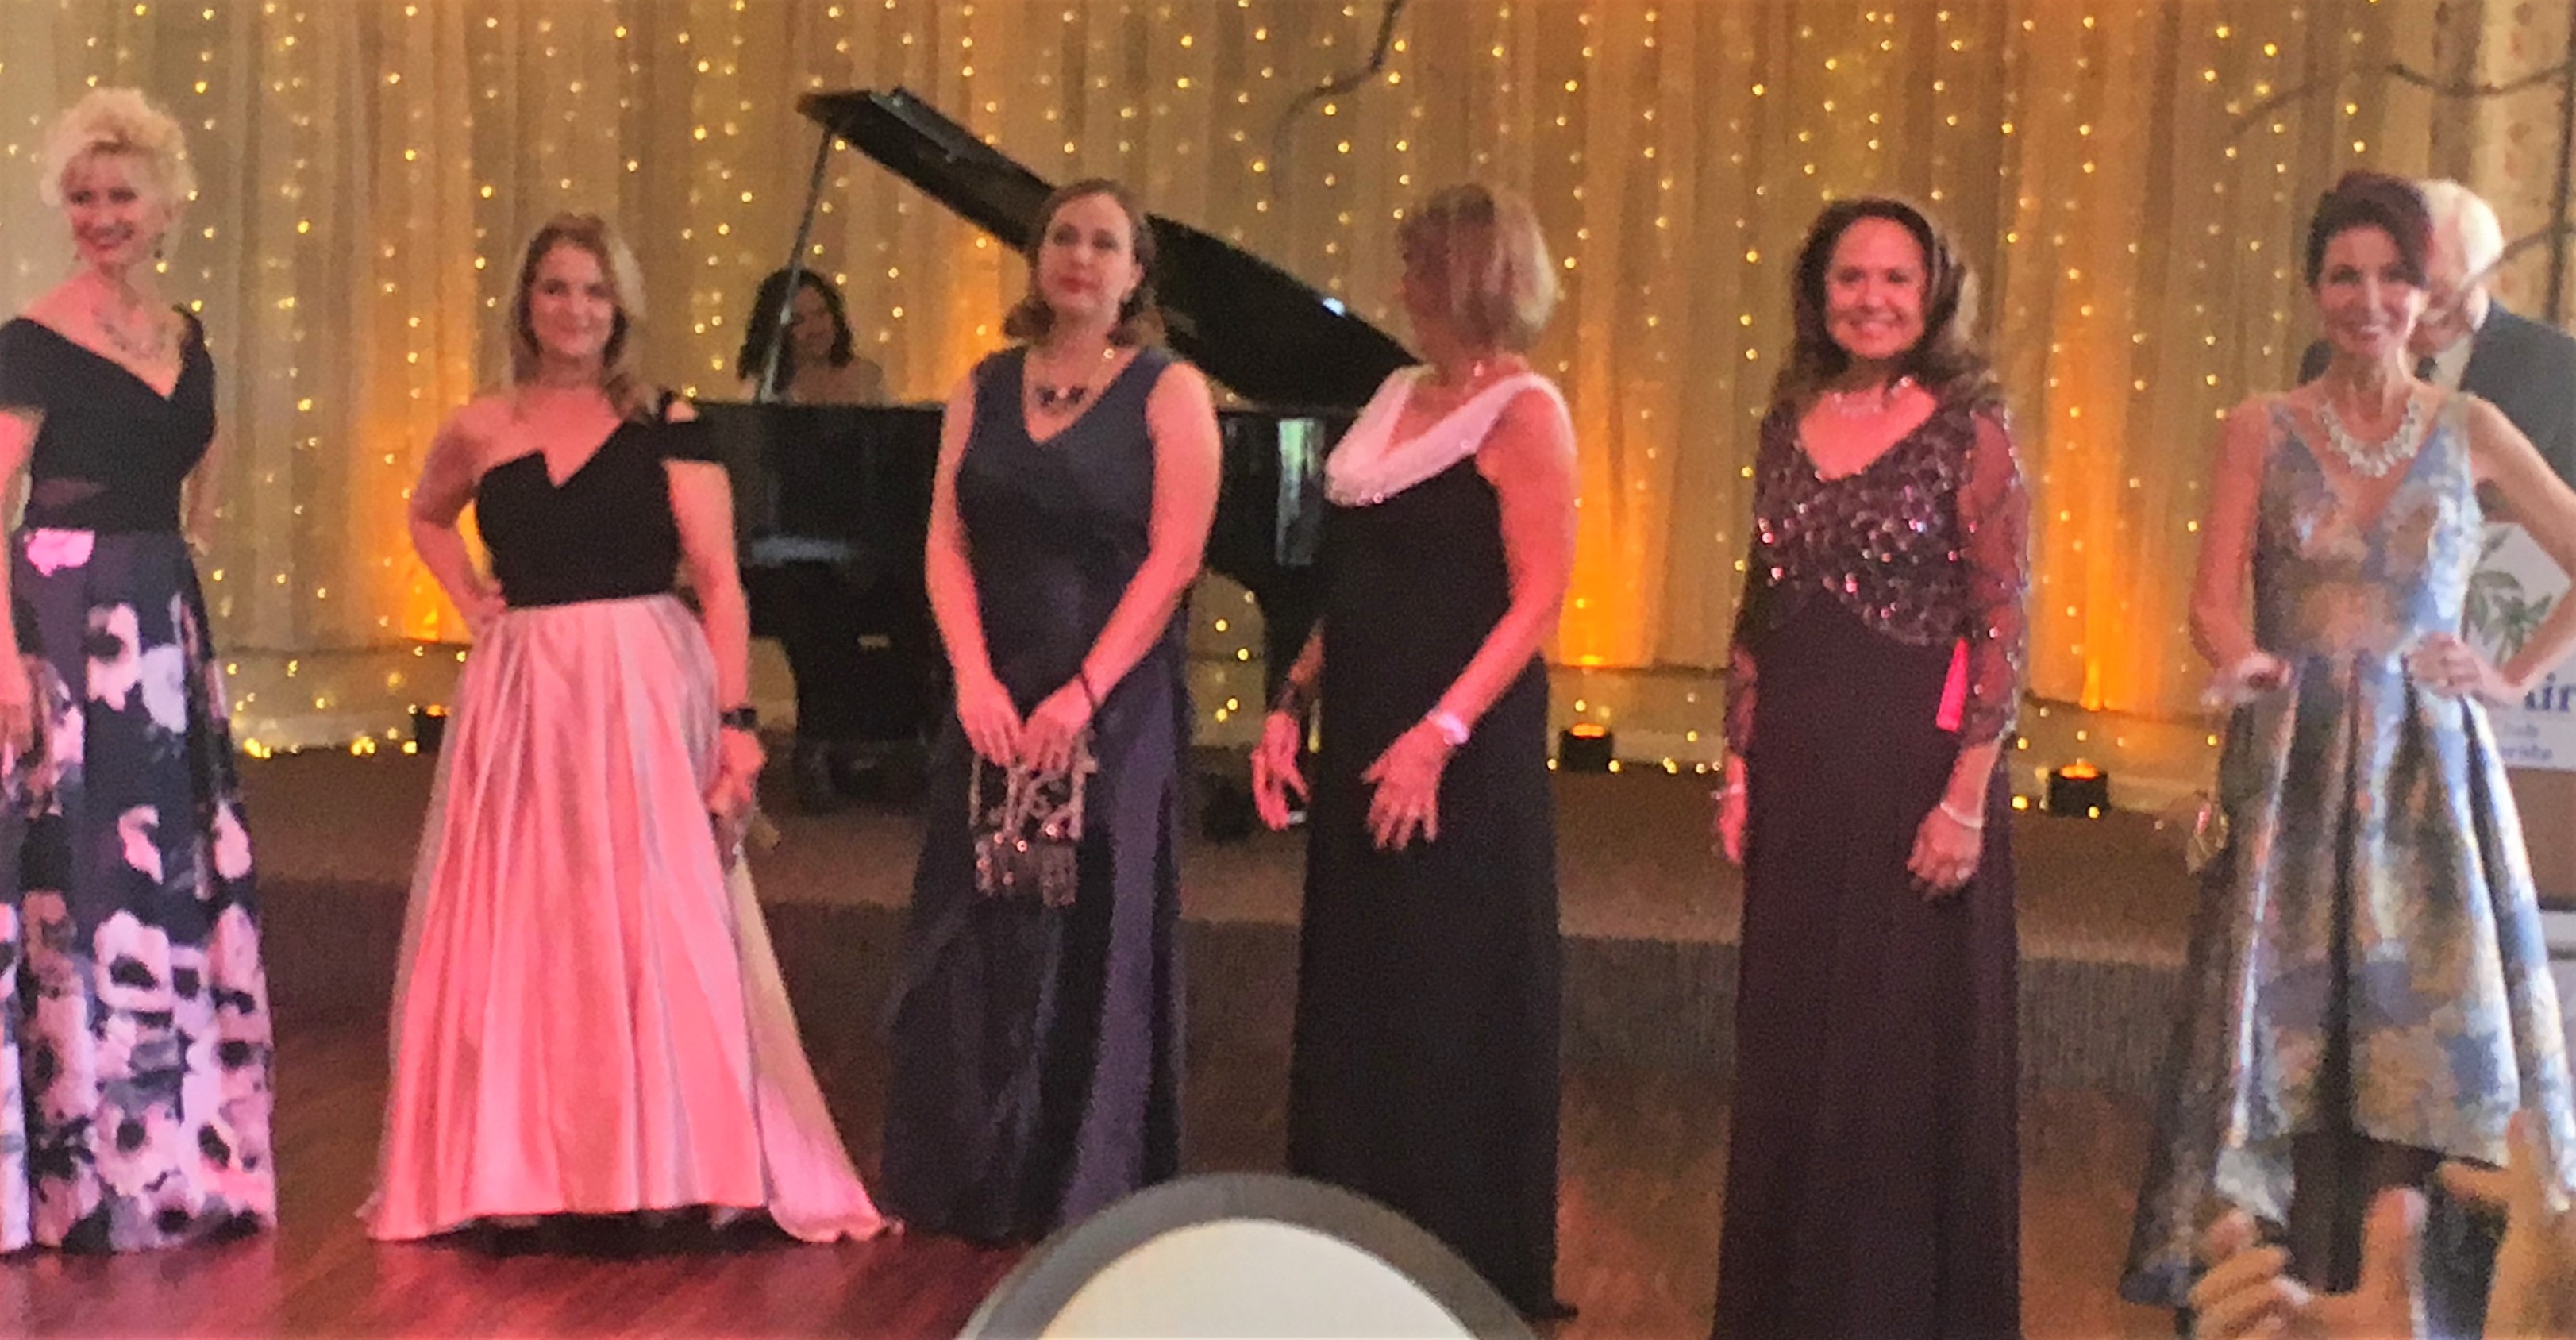 Melodie Dickerson, Chief of Police Bernadette DiPino, Andrea Knies, Kathleen Allen, Dodie Shuert and Katherine 
						Pike gather together on stage after the show.